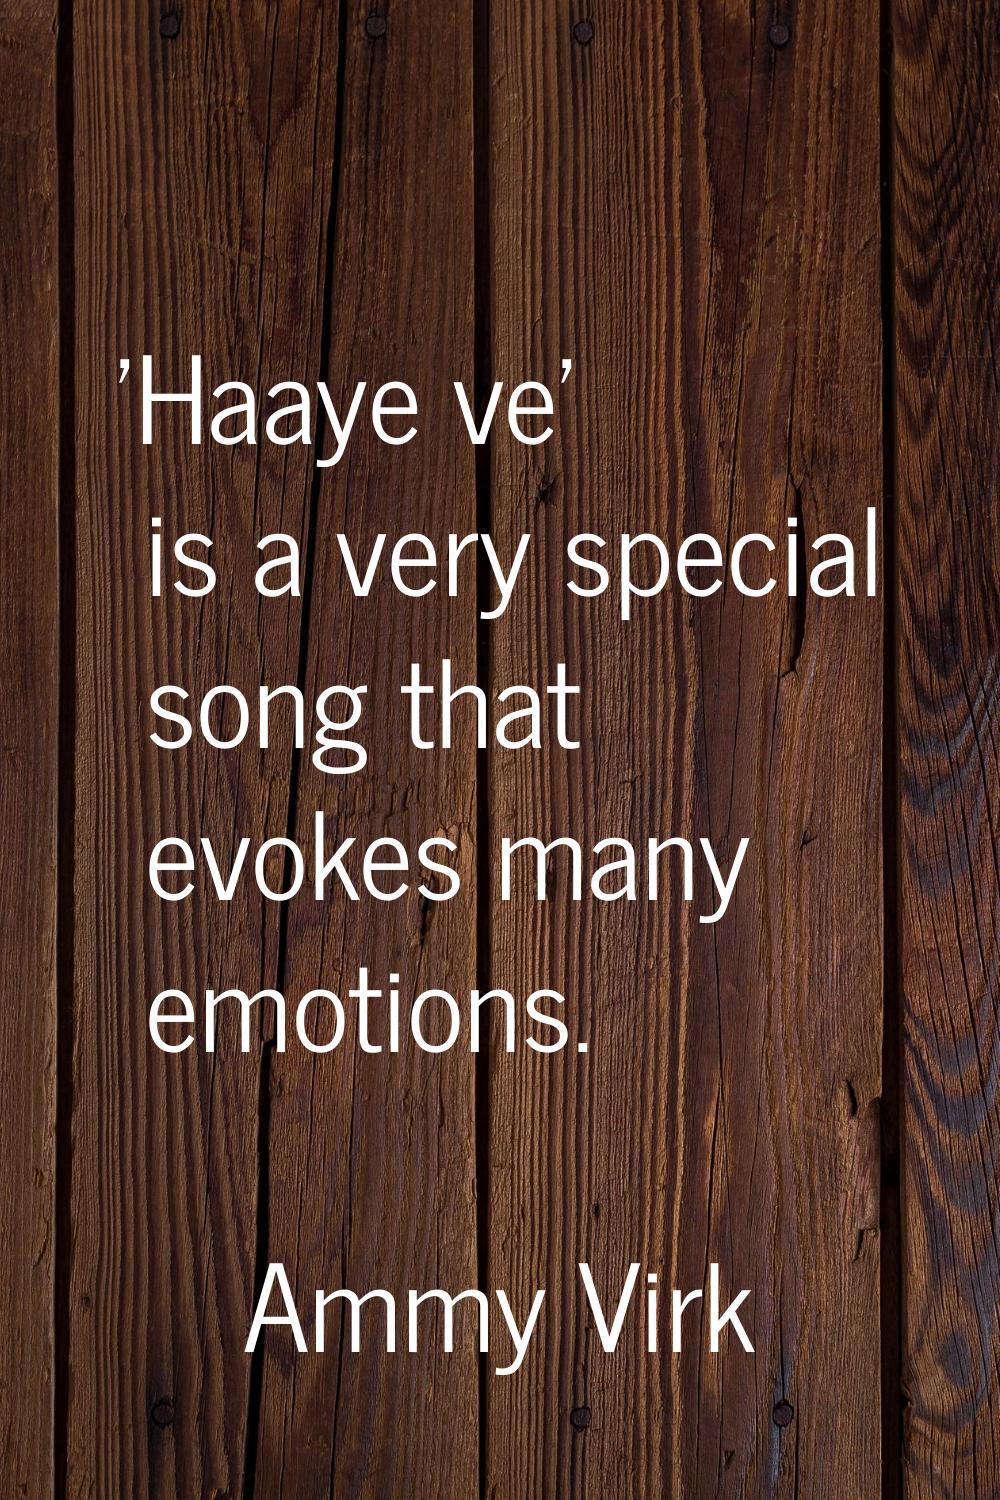 'Haaye ve' is a very special song that evokes many emotions.